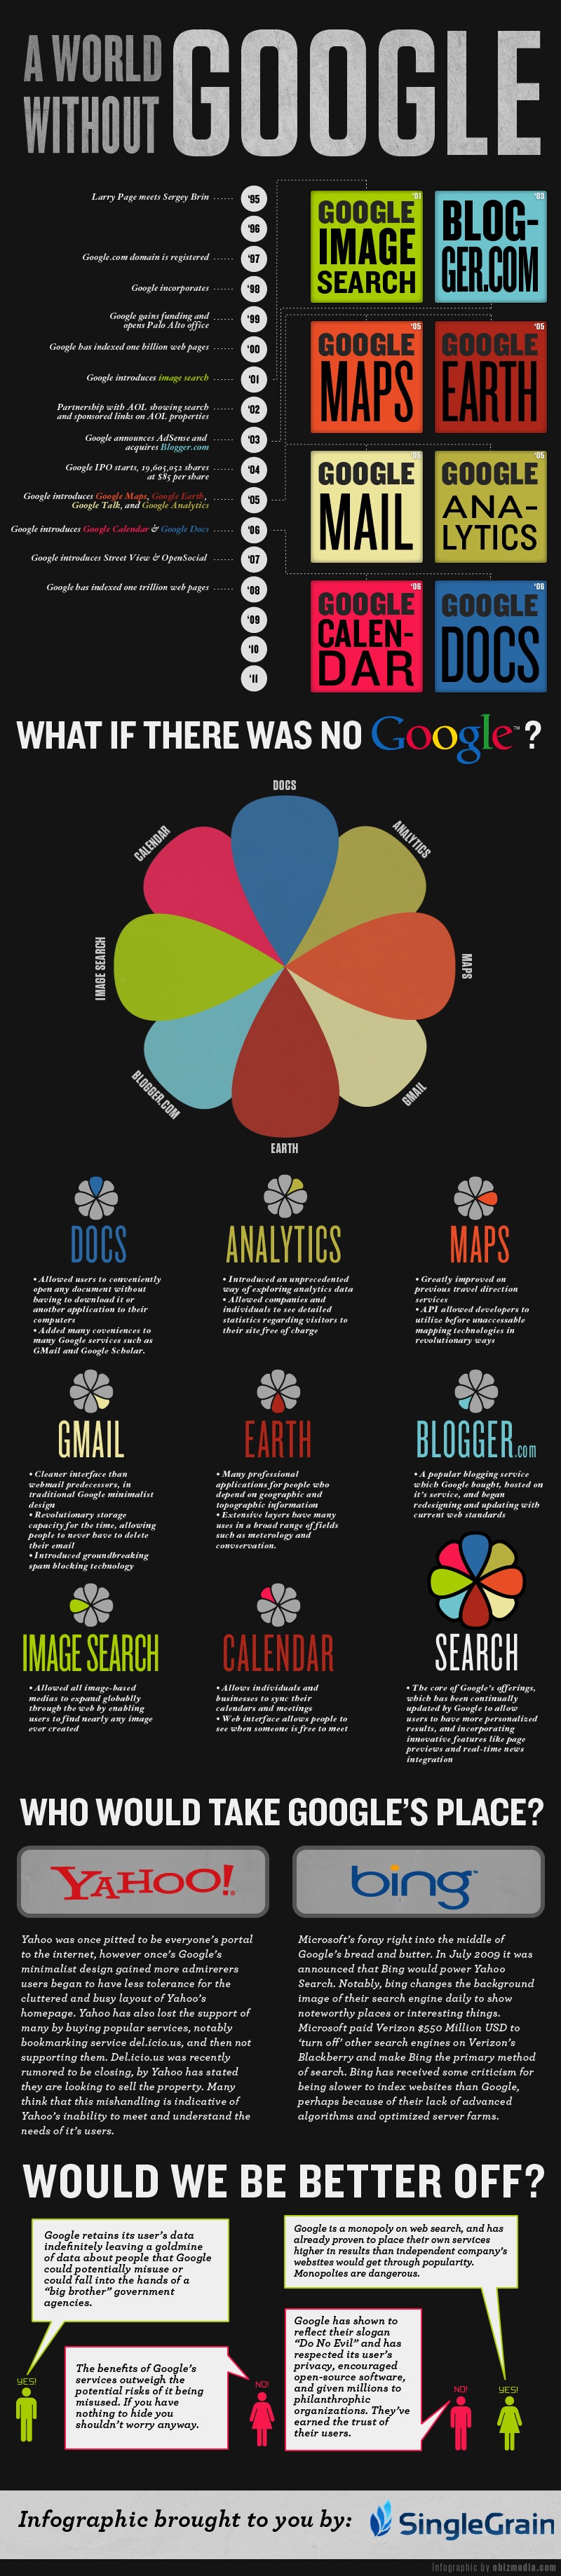 What Would Happen: A World Without Google [Infographic]